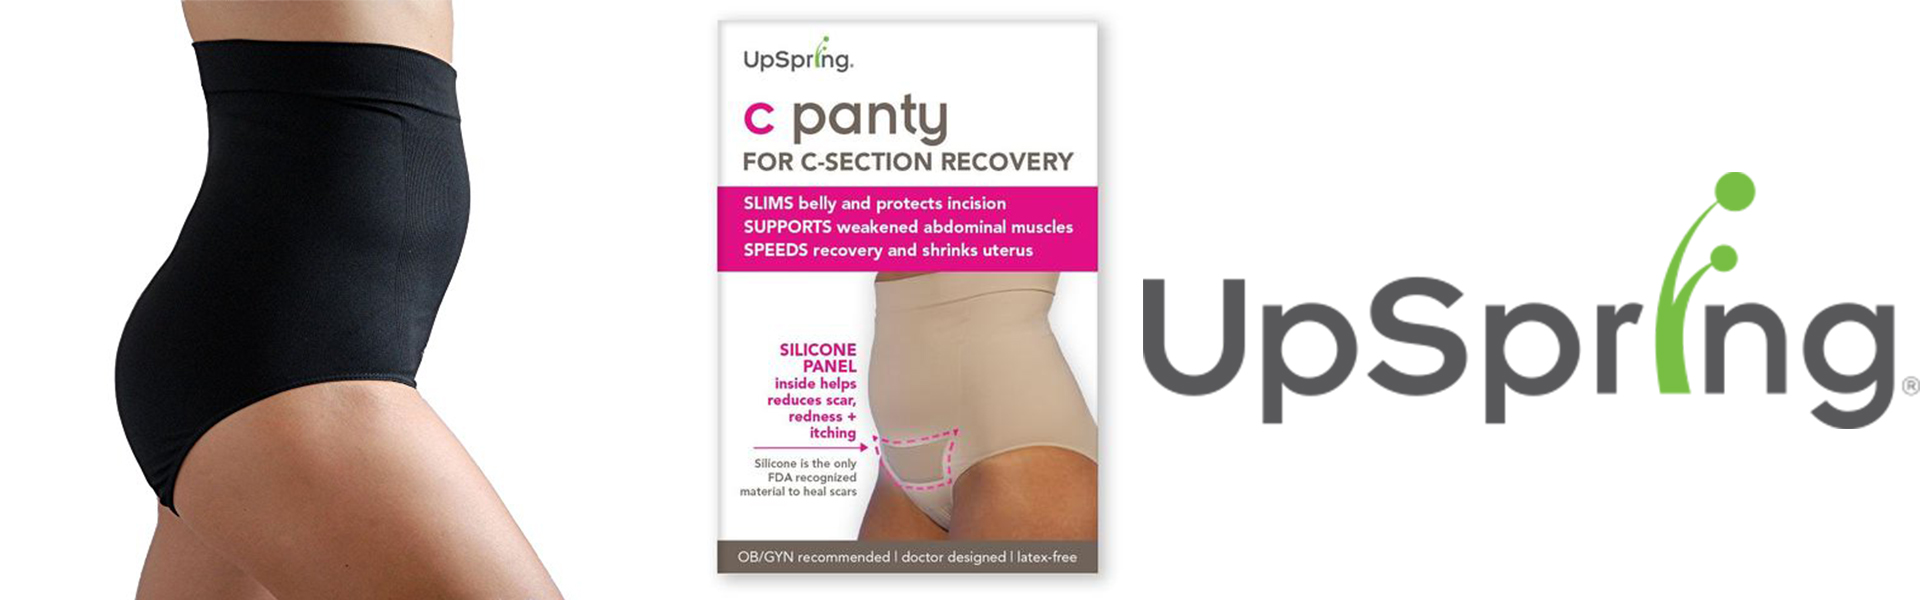 Everything Baby on Instagram‎: Upspring C-Panty C-Section